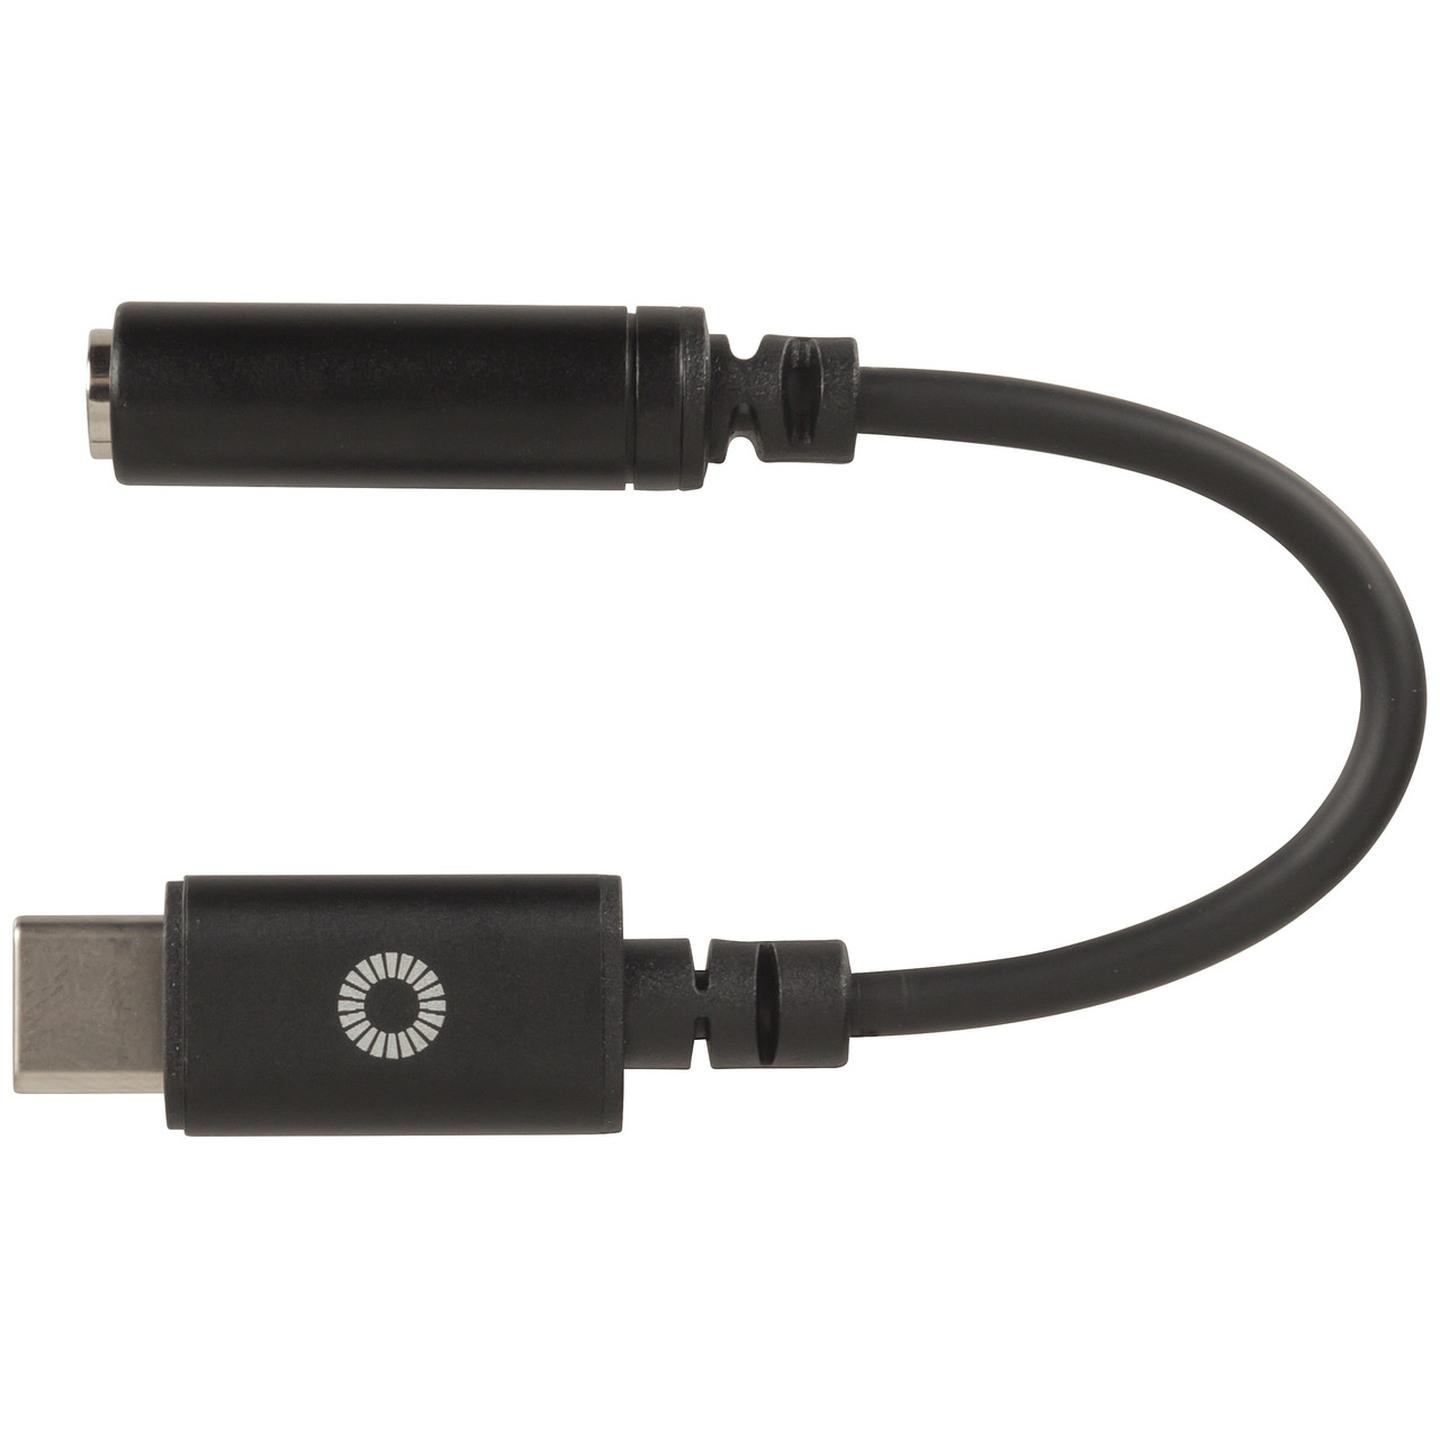 USB Type-C to 3.5mm Audio Socket Cable